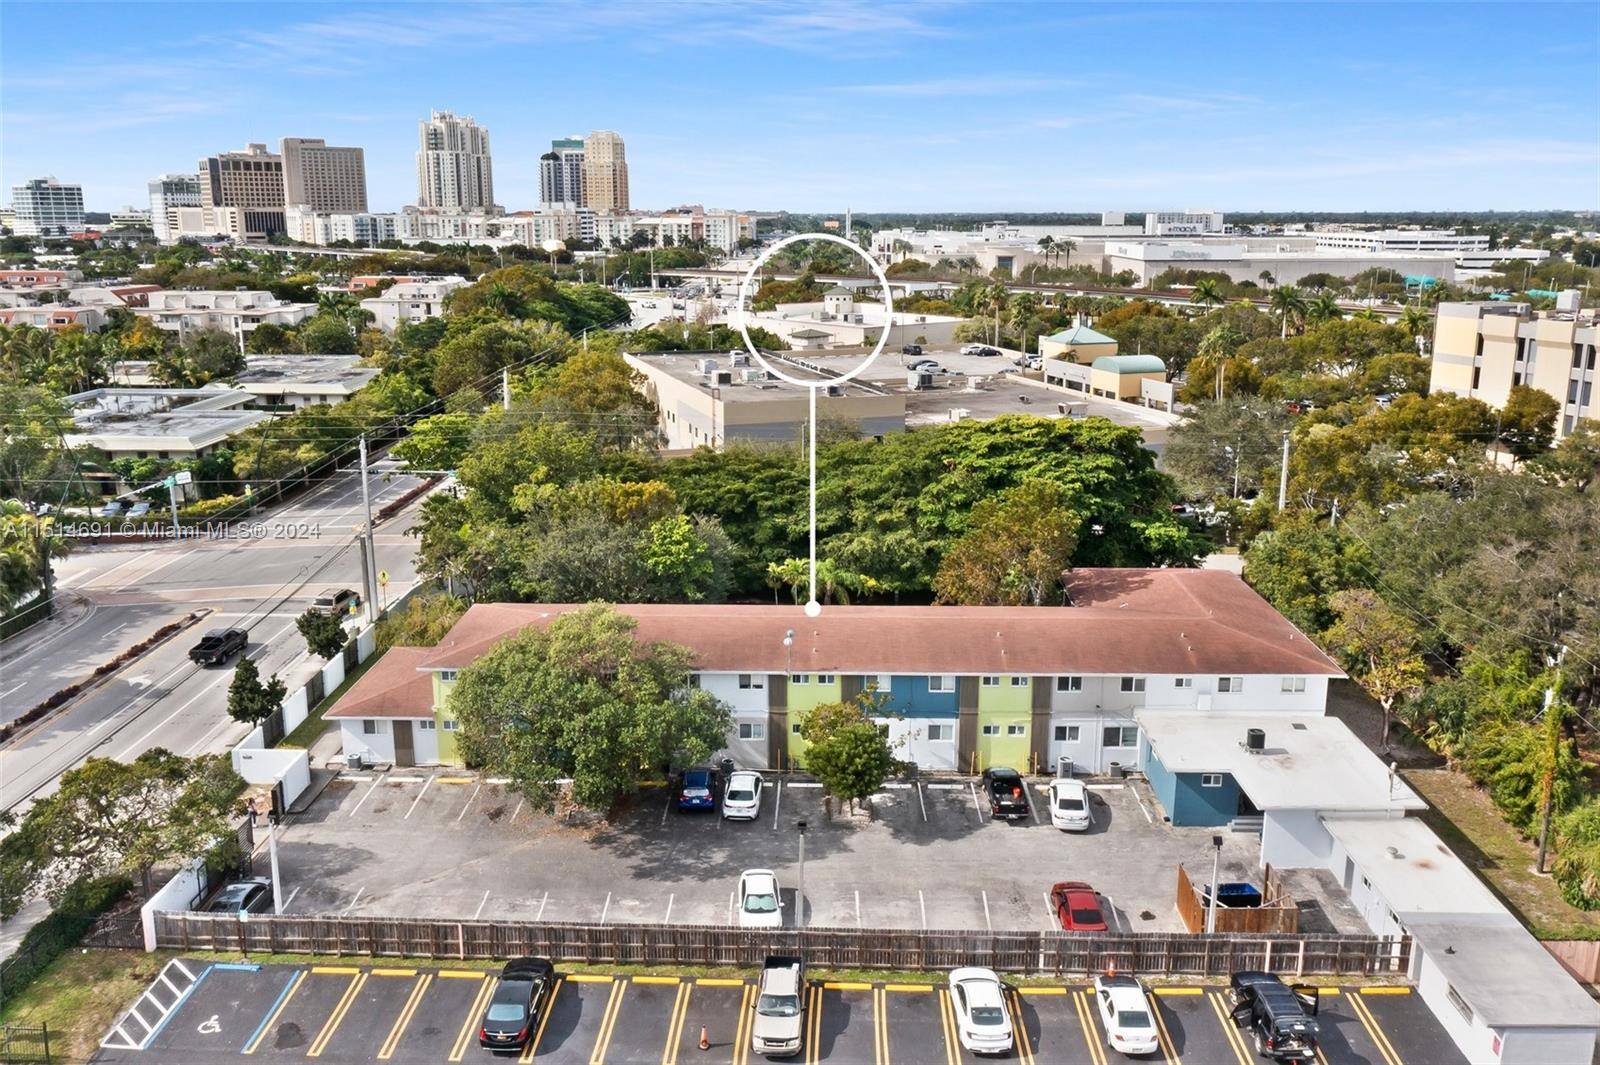 Opportunity knocks. This 19 unit property is located in the affluent Village of Pinecrest, FL, offering a great mix of 1, 2, and 3 bedroom apartments.